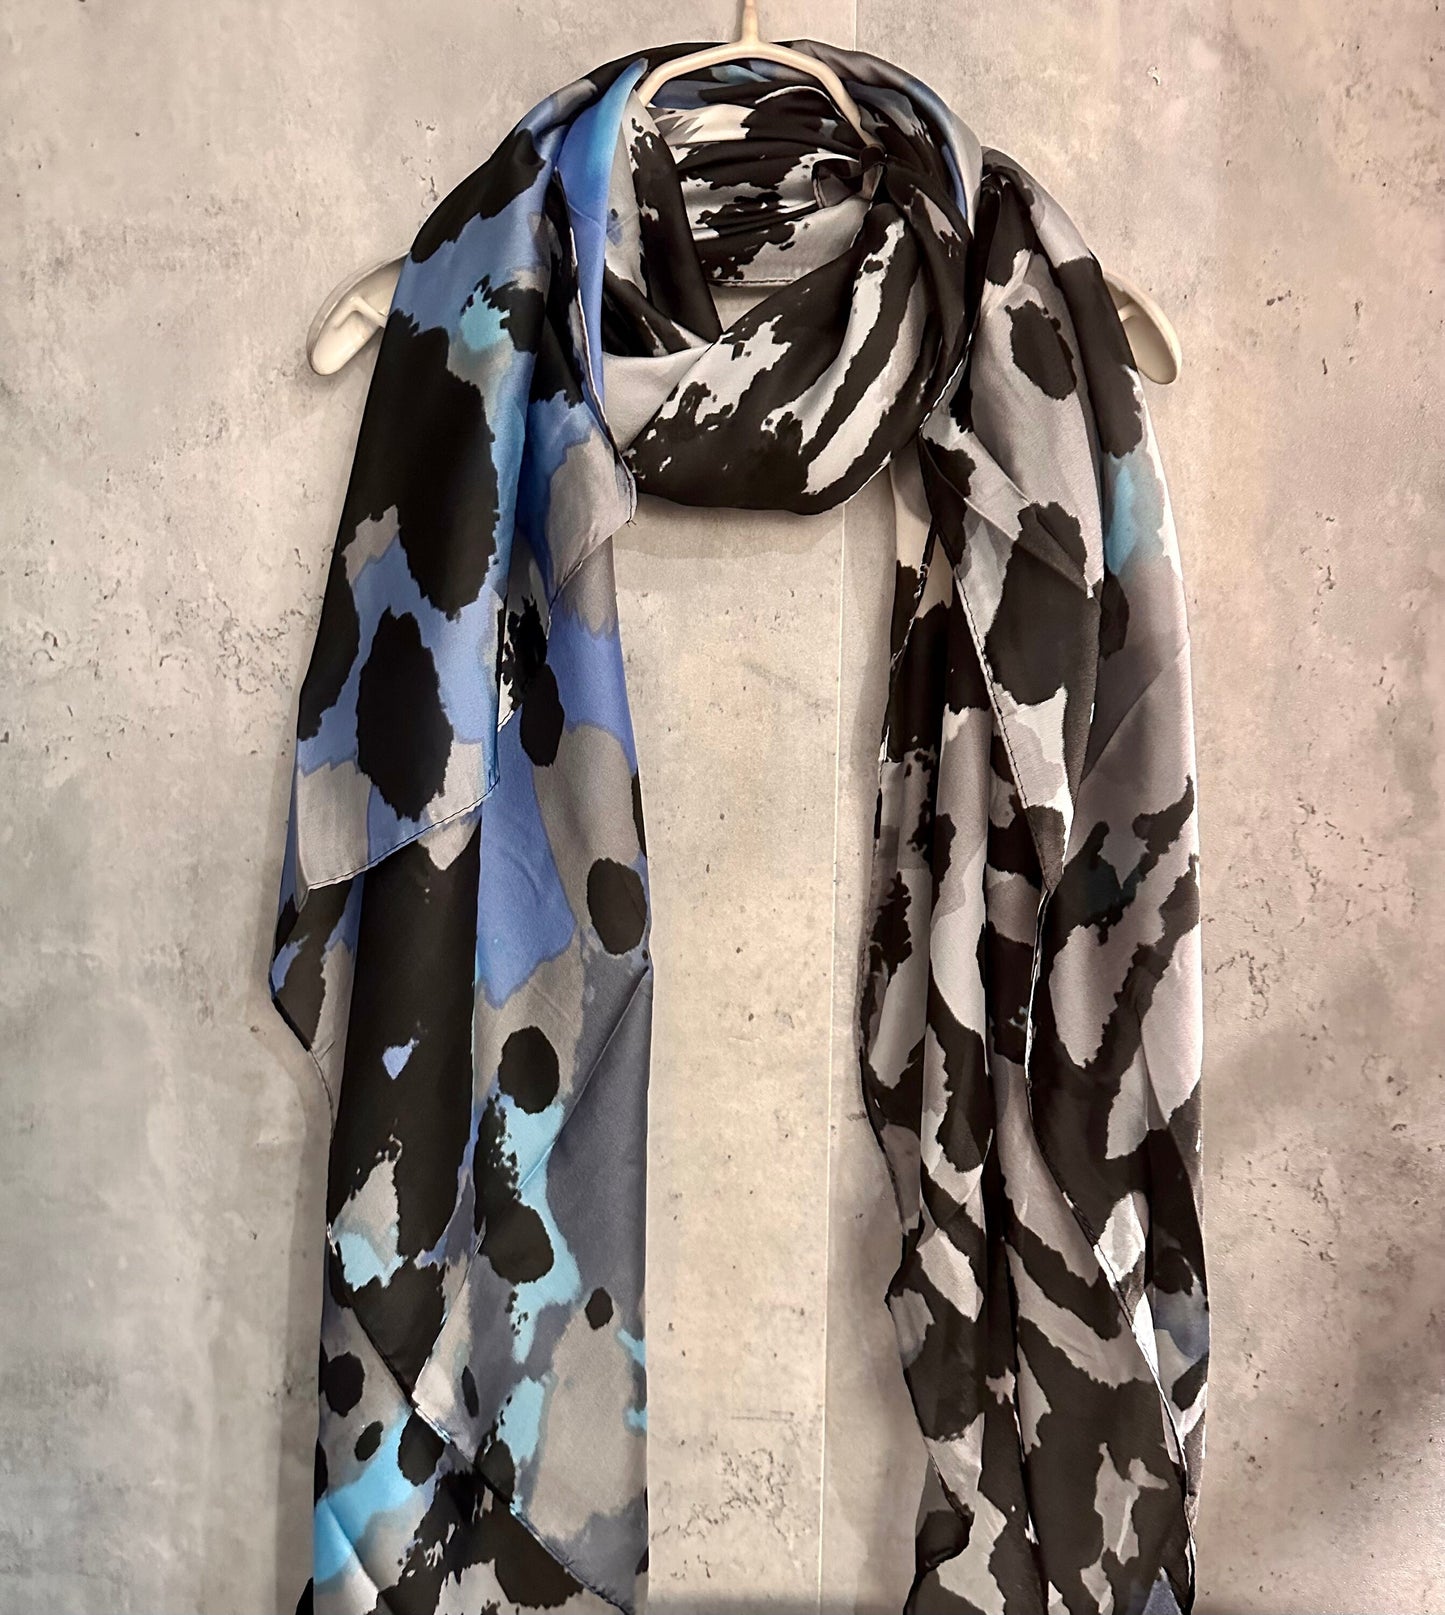 Splotches Colour Blue Grey Silk Scarf/Spring Summer Autumn Scarf/Scarf Women/Gifts For Mom/Gifts For Her Birthday Christmas/UK Seller